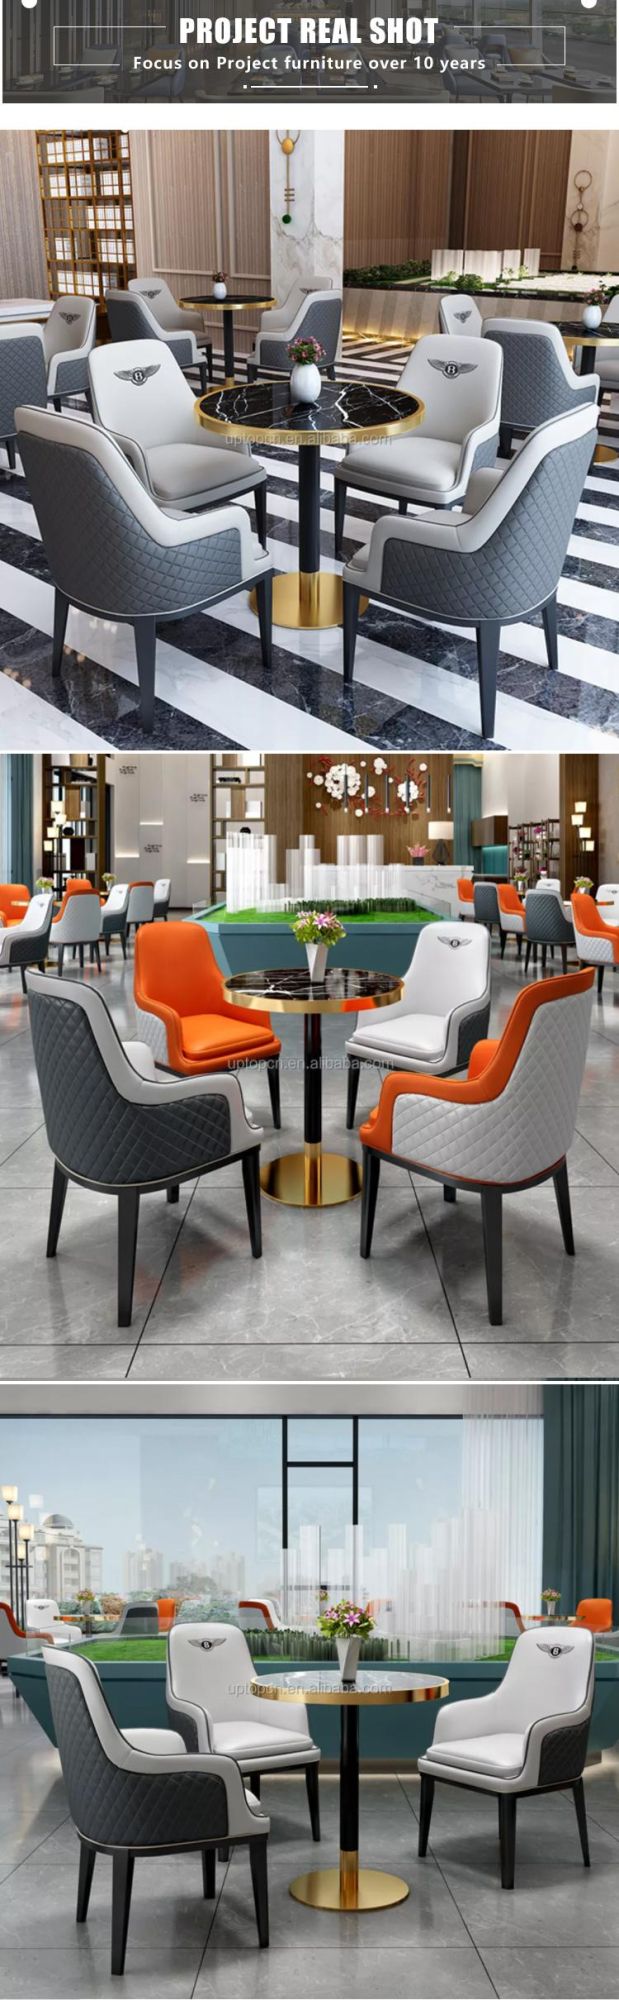 High Quality Customized Upholstered Seating Dining Chair Table Booth Restaurant Sofa Furniture Set (SP-KS145)